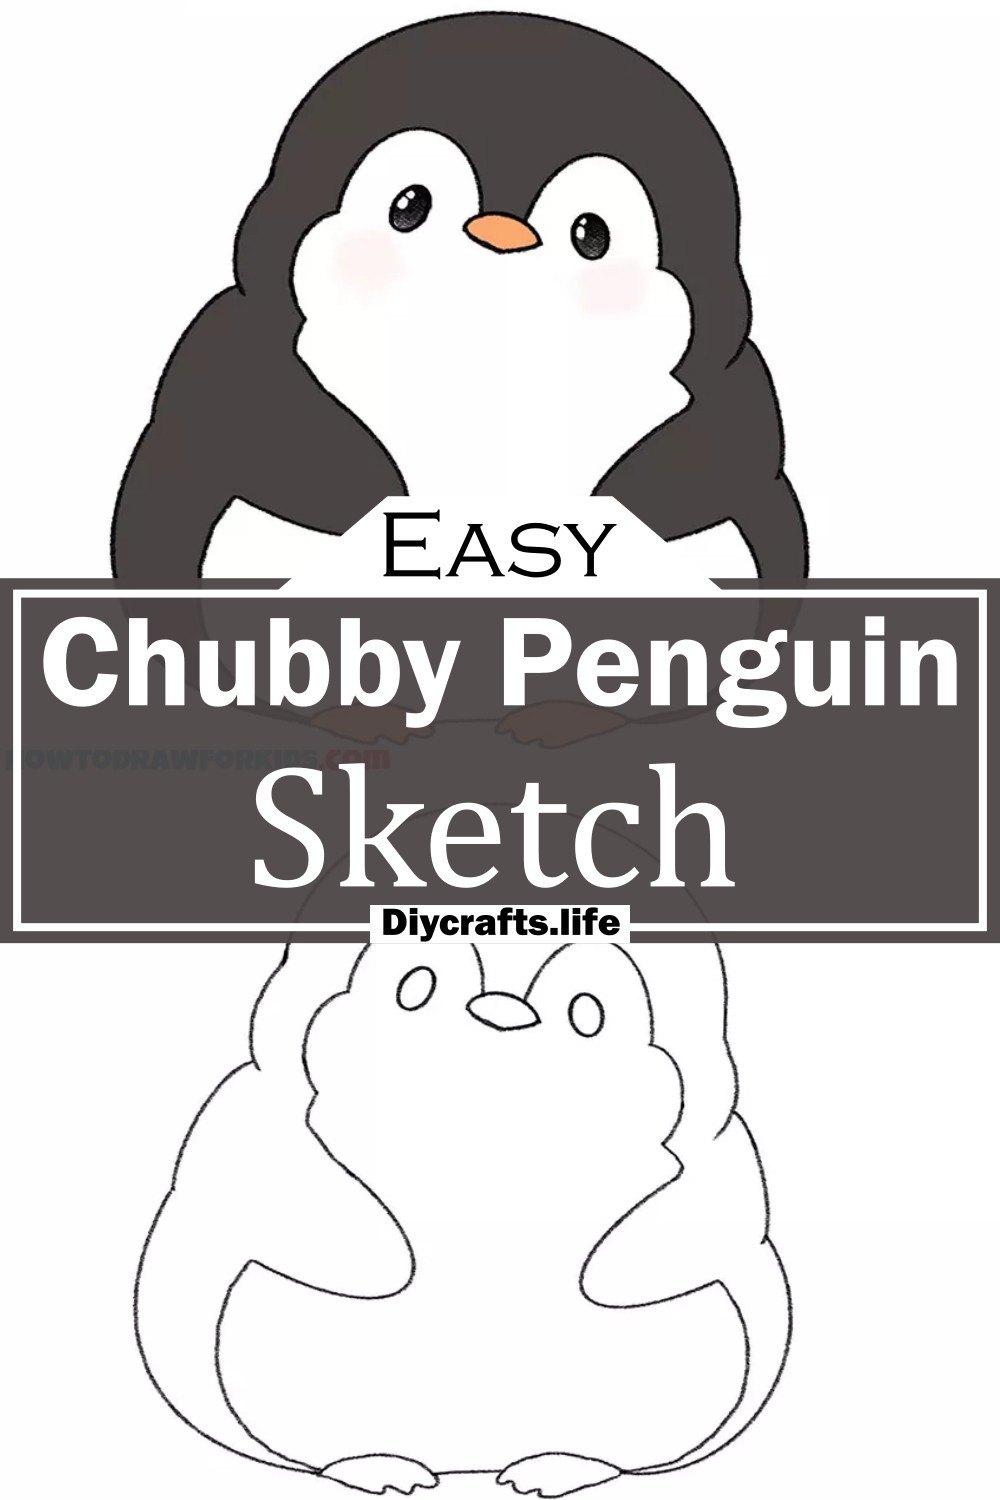 Chubby Penguin Sketch